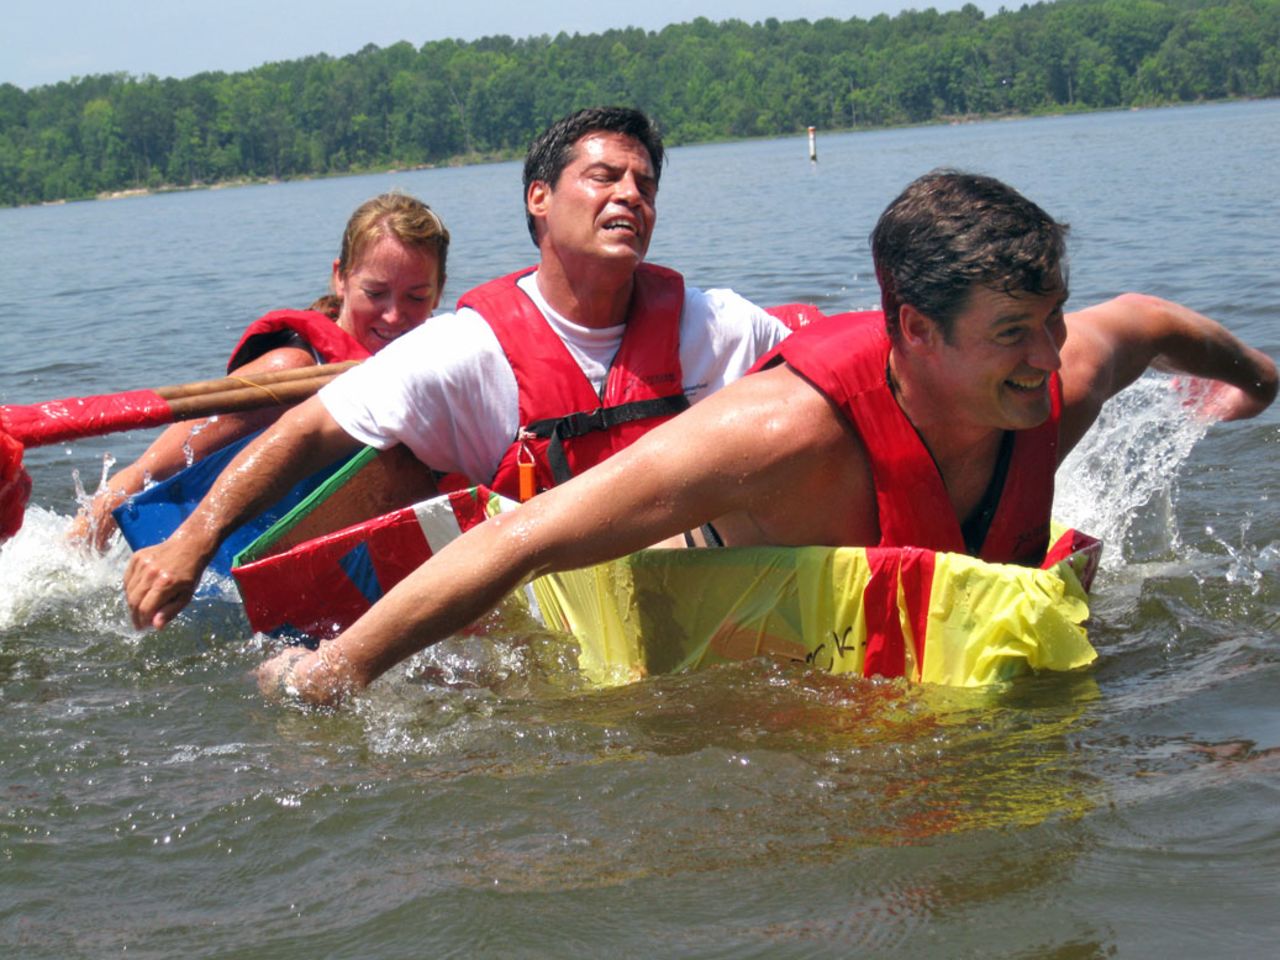 Executive participants strain to stay afloat as they attempt to cross a lake in a vessel they have built on an Adventure Associates retreat in North Carolina, USA.